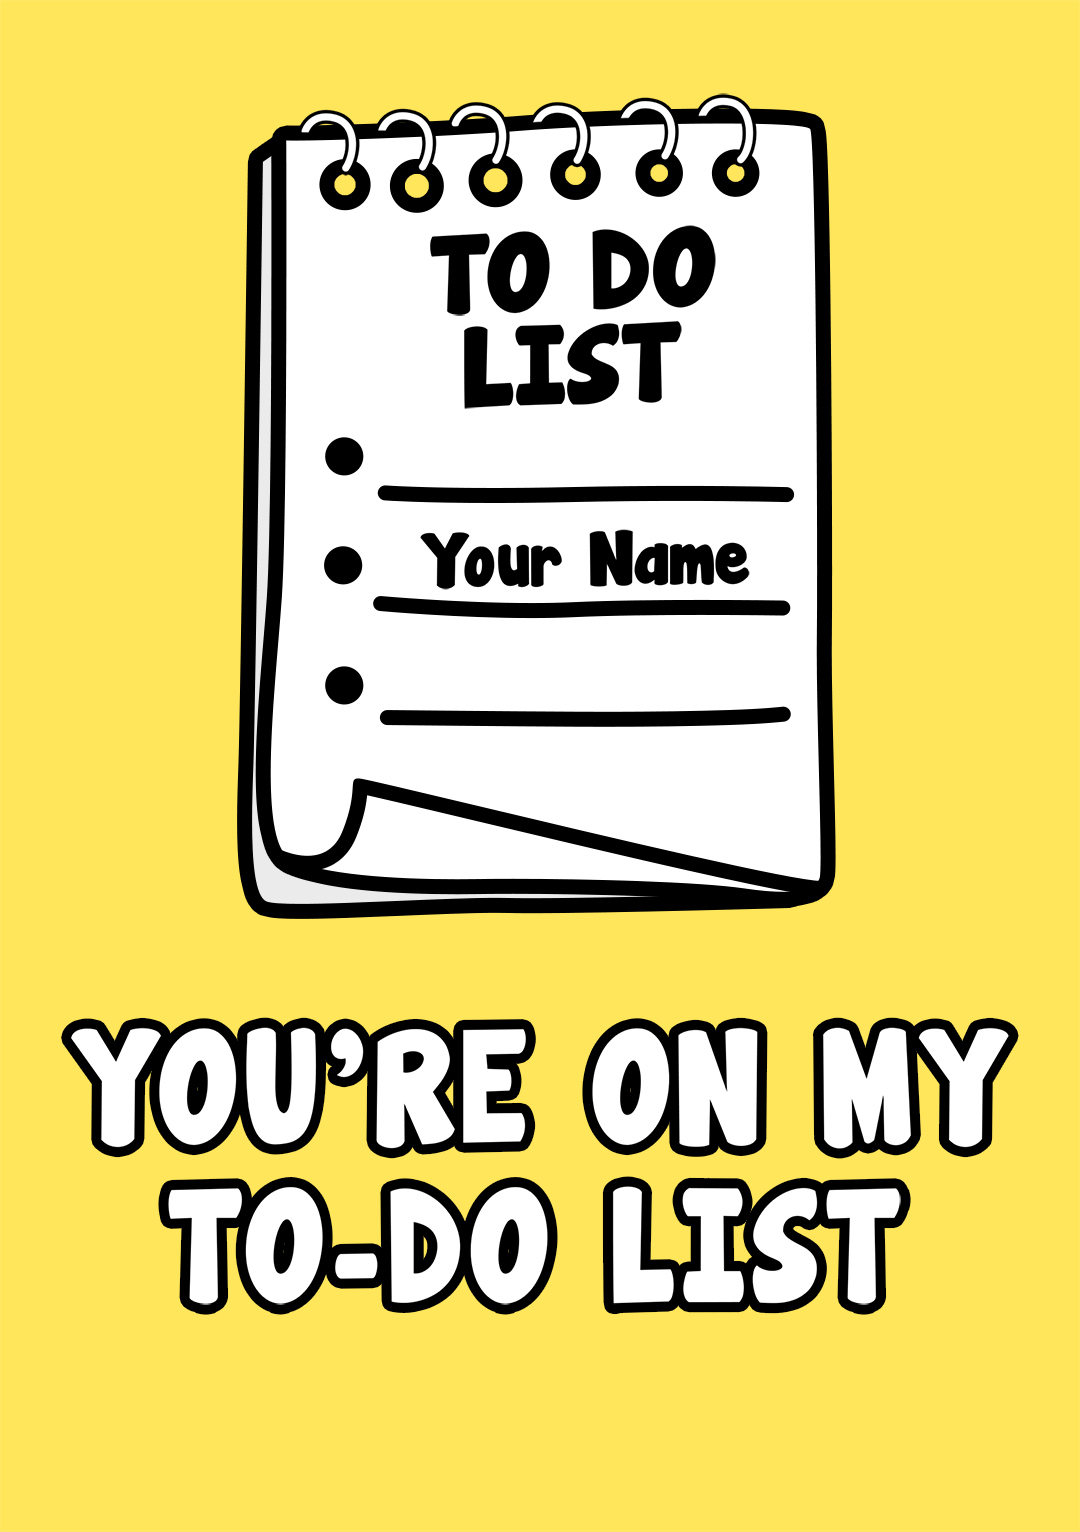 You're On My To-Do List... - Funny Love Card